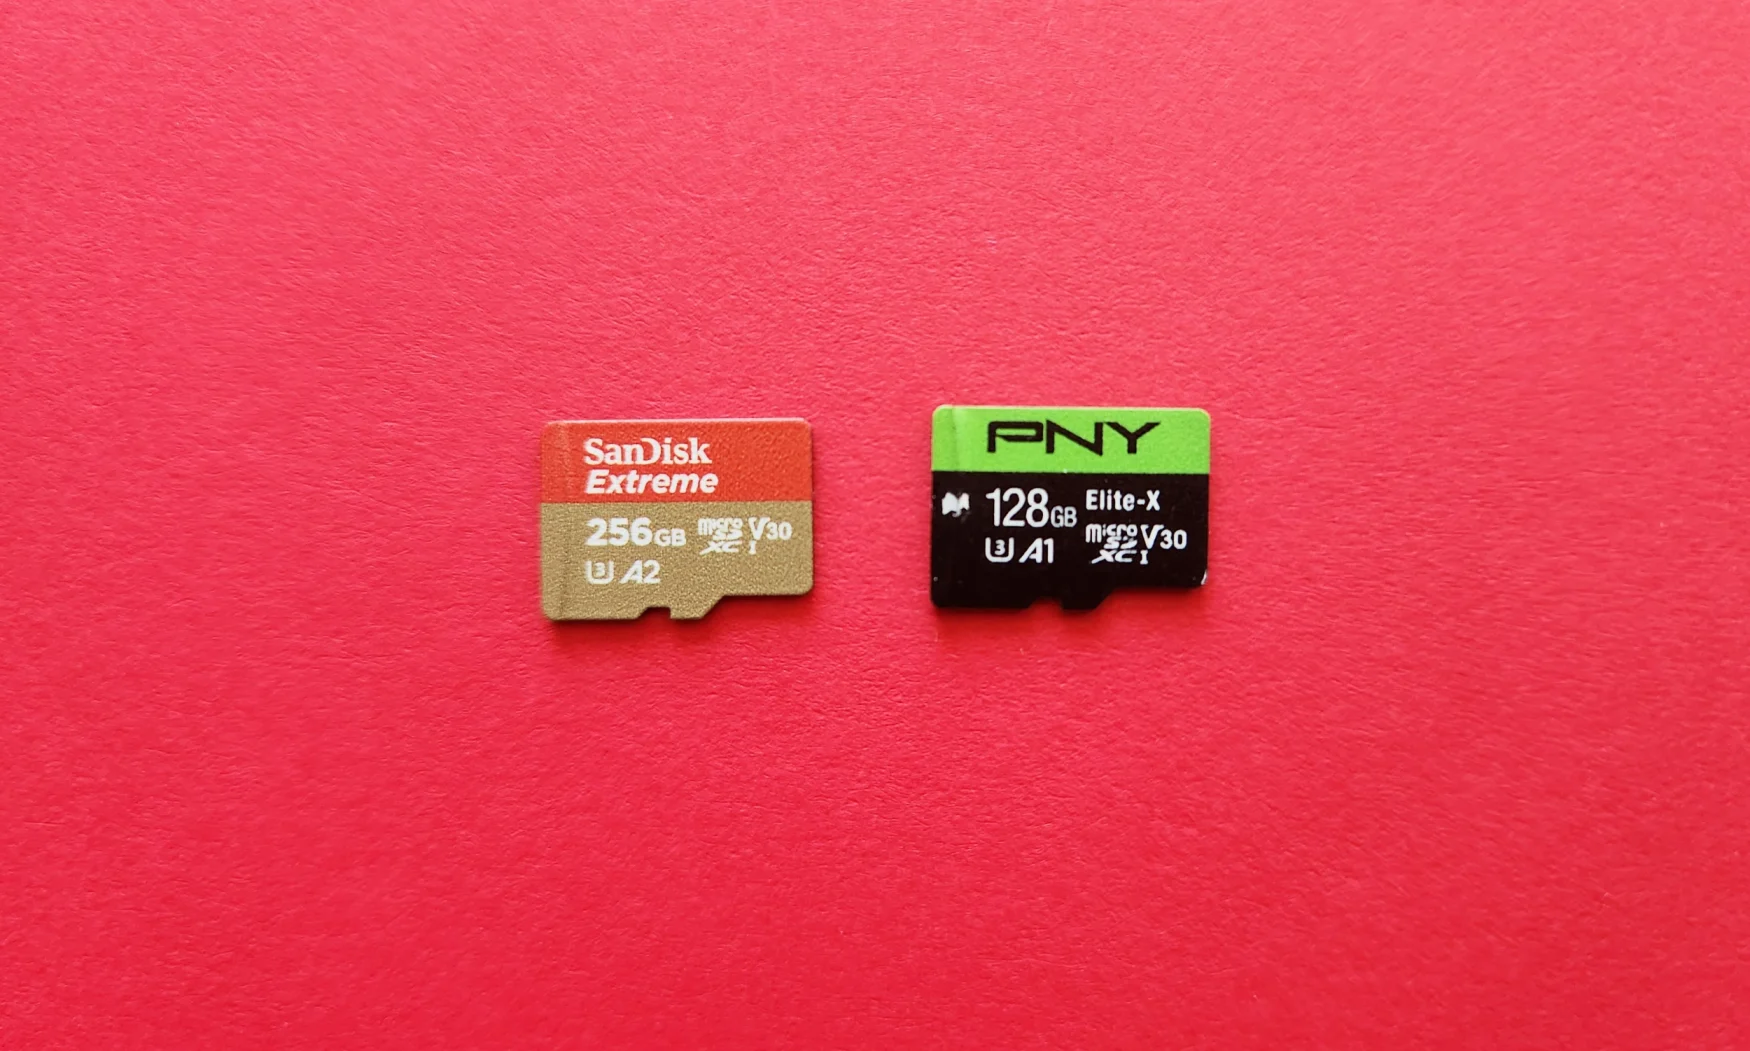 The SanDisk Extreme and PNY Elite-X microSD cards.